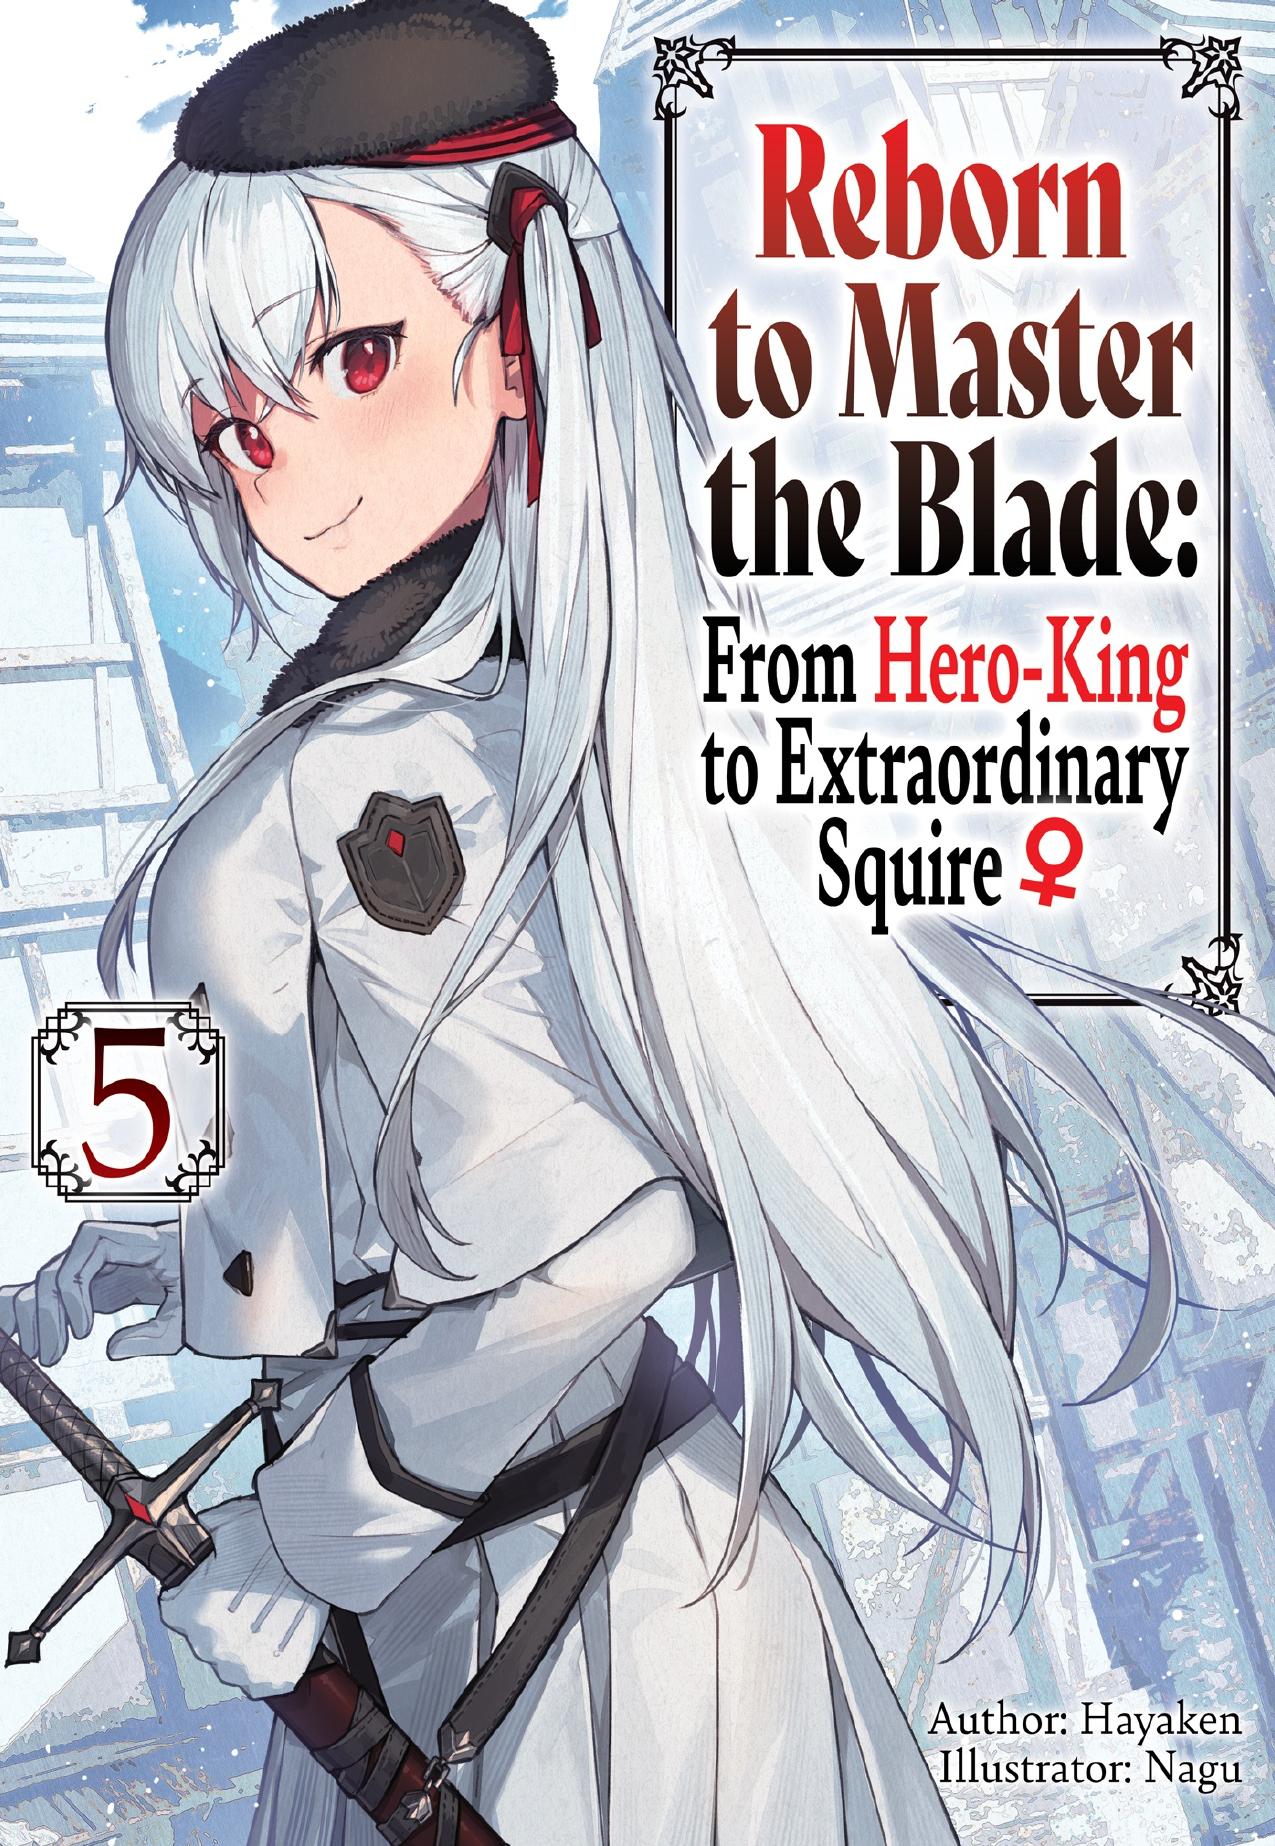 Reborn to Master the Blade: From Hero-King to Extraordinary Squire â Volume 5 by Hayaken